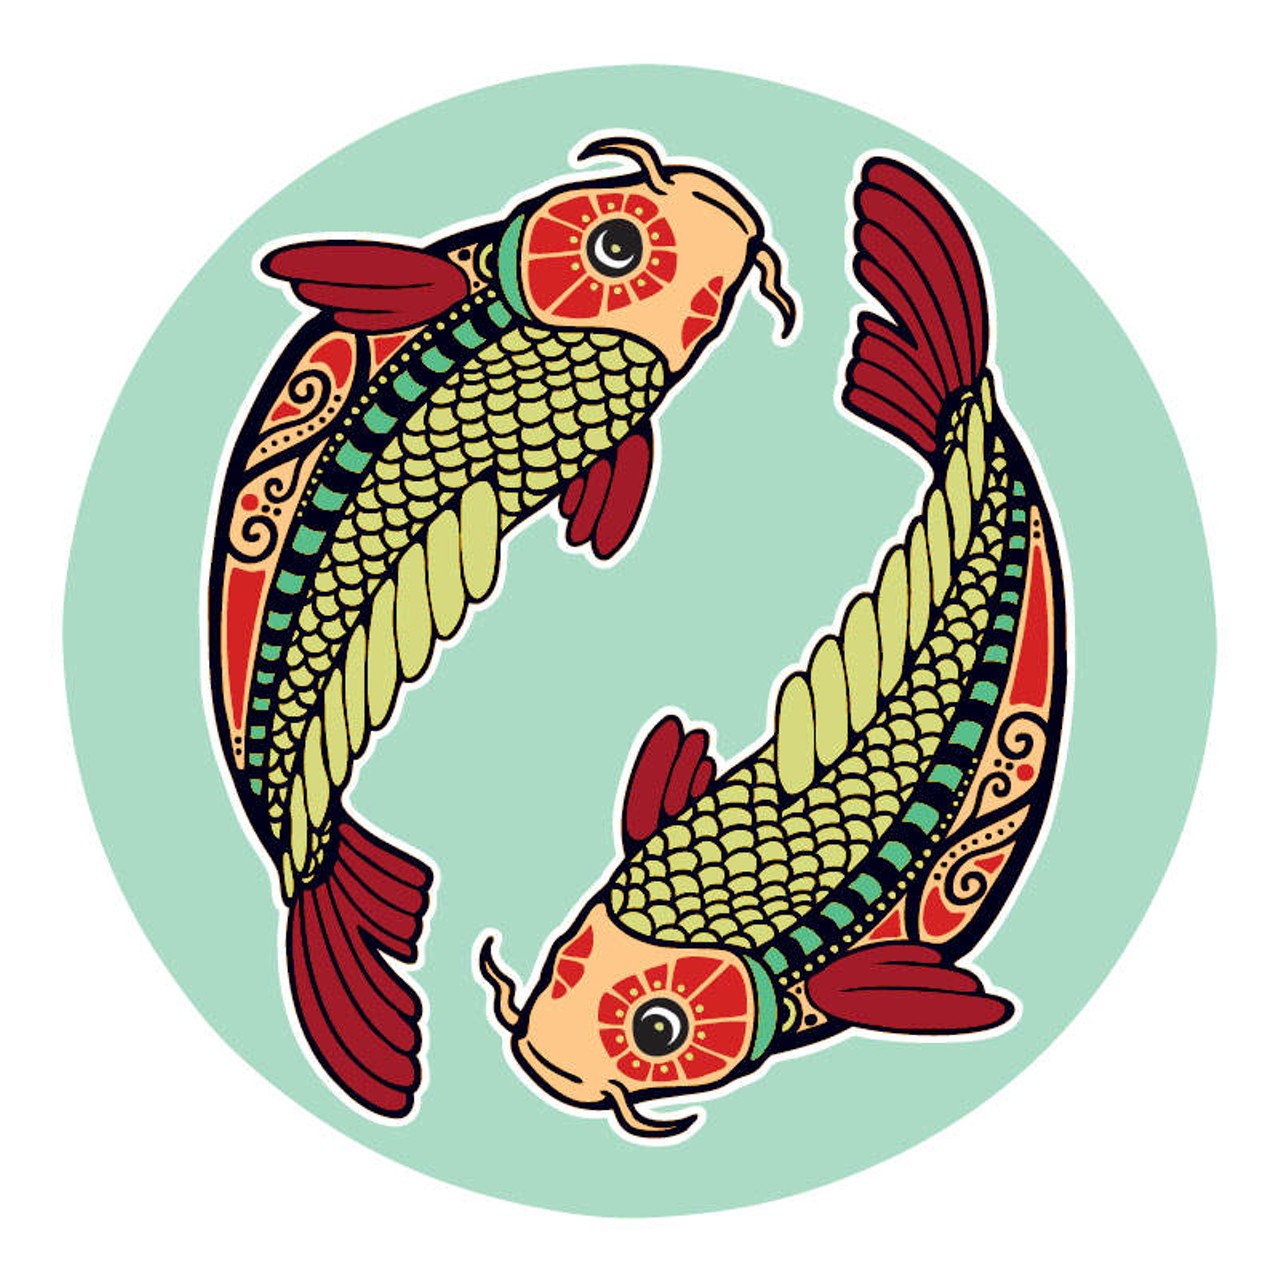 PISCES (Feb. 21-March 20): 
No one needs to tell you that people have a tendency to take advantage of your goodness and generosity. In many cases, those closest to you are the main culprits. It&#146;s totally OK to keep on giving, but when it gets to the point where it hurts you to persist, it&#146;s best to let the element of discernment kick in. Be mindful of what you give, but be wise enough to keep an eye on what you get in return. There are other aspects of your reality that could use a little pick-me-up: you know what they involve. The outer stuff will keep. Don&#146;t procrastinate when it comes to your inner work.